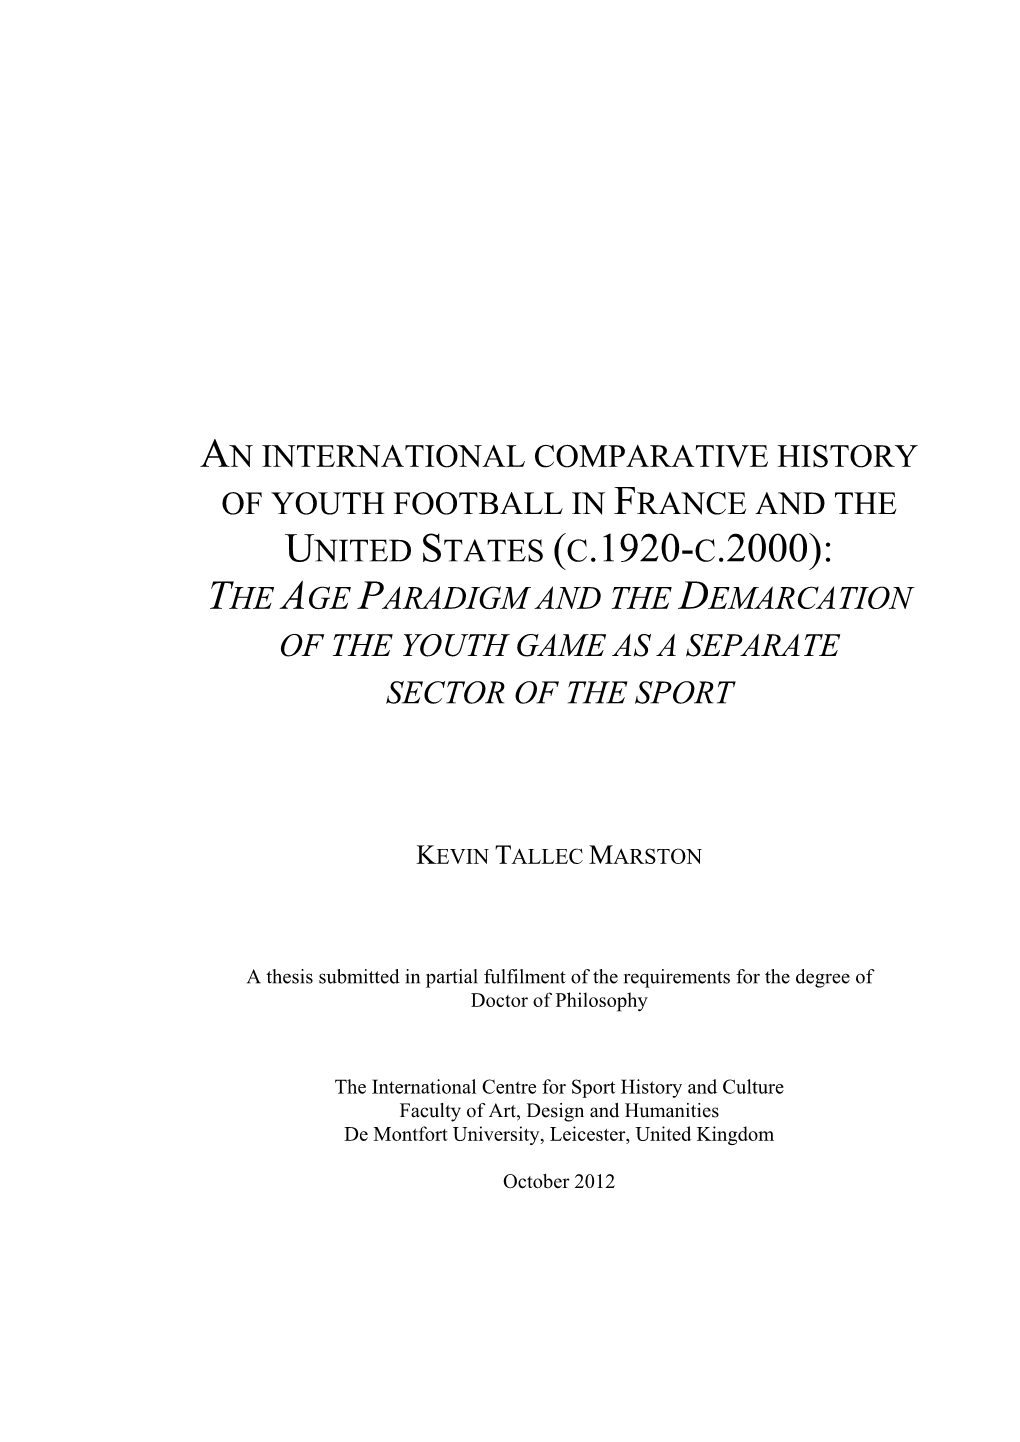 United States (C.1920-C.2000): the Age Paradigm and the Demarcation of the Youth Game As a Separate Sector of the Sport